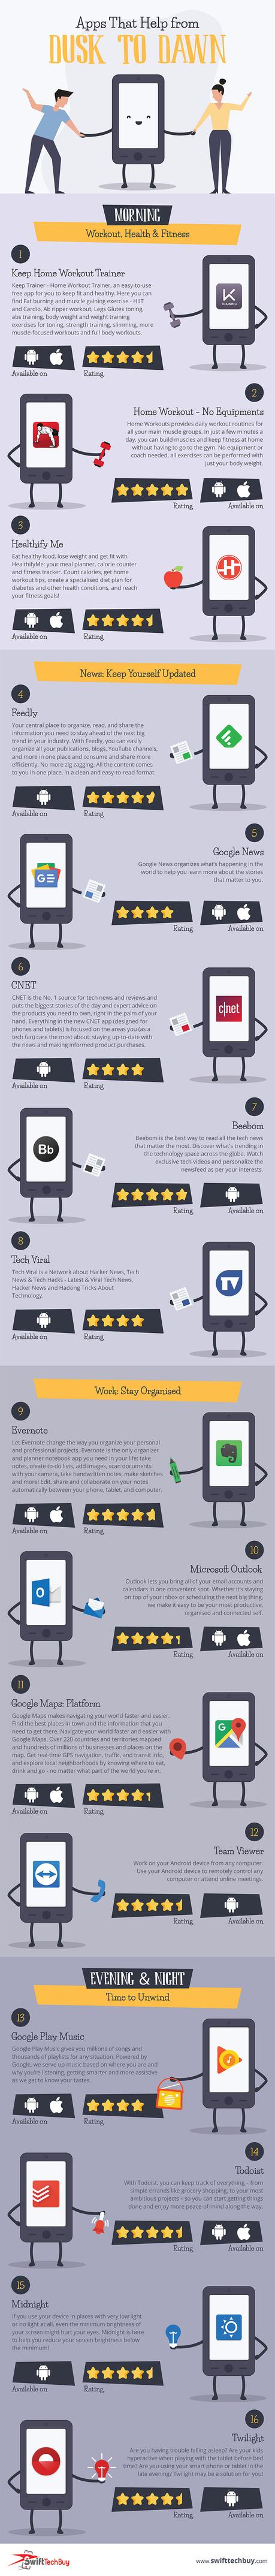 Apps that Help from Dusk to Dawn infographic